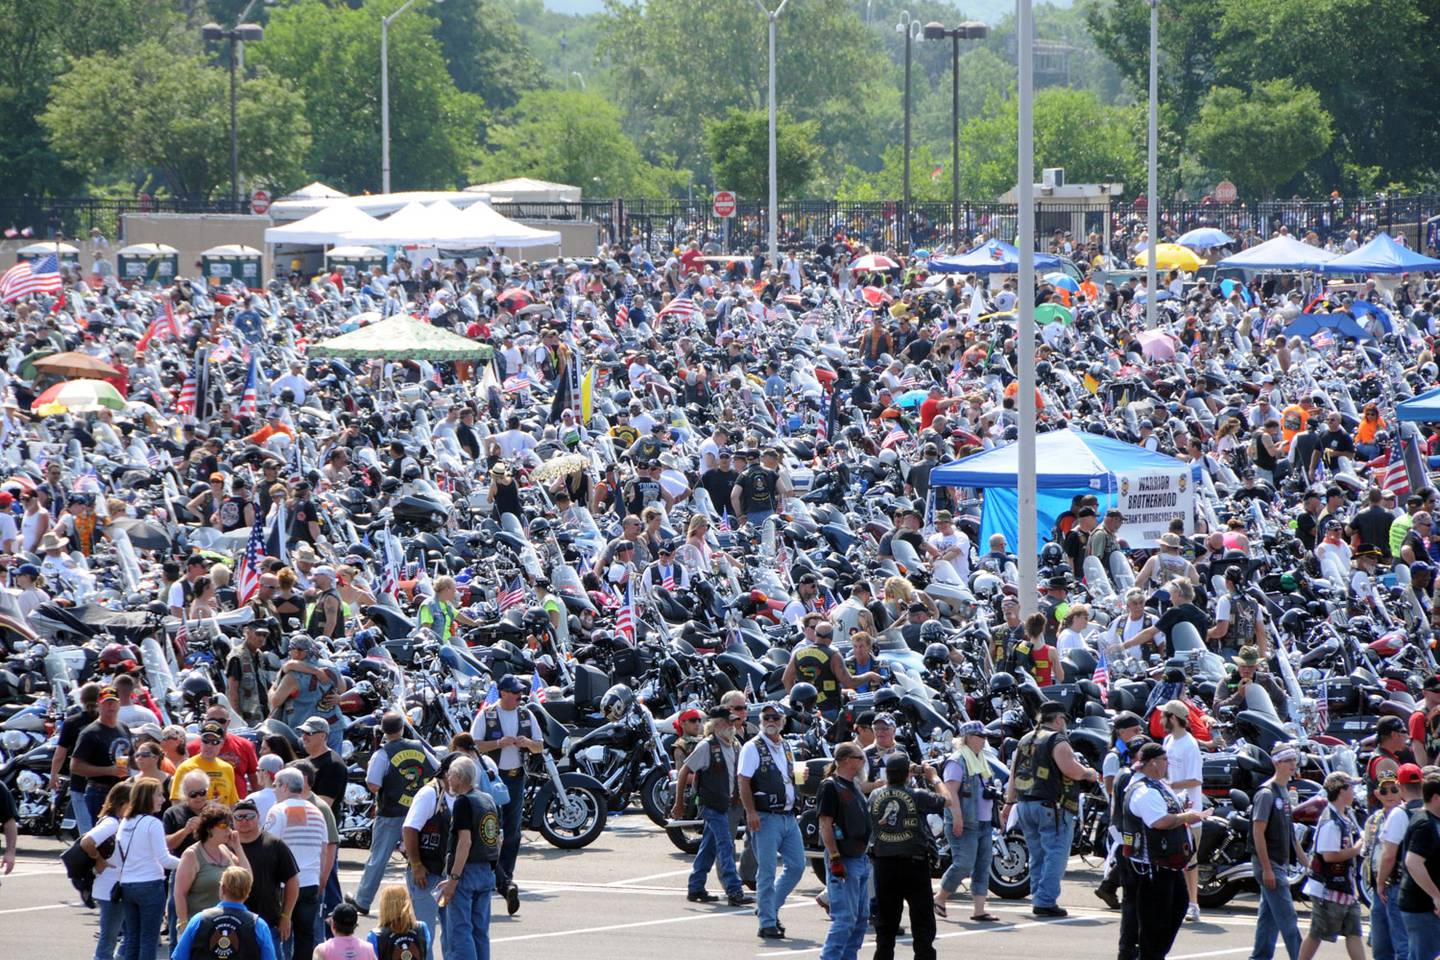 Rolling Thunder turns 30 The iconic ride through the years